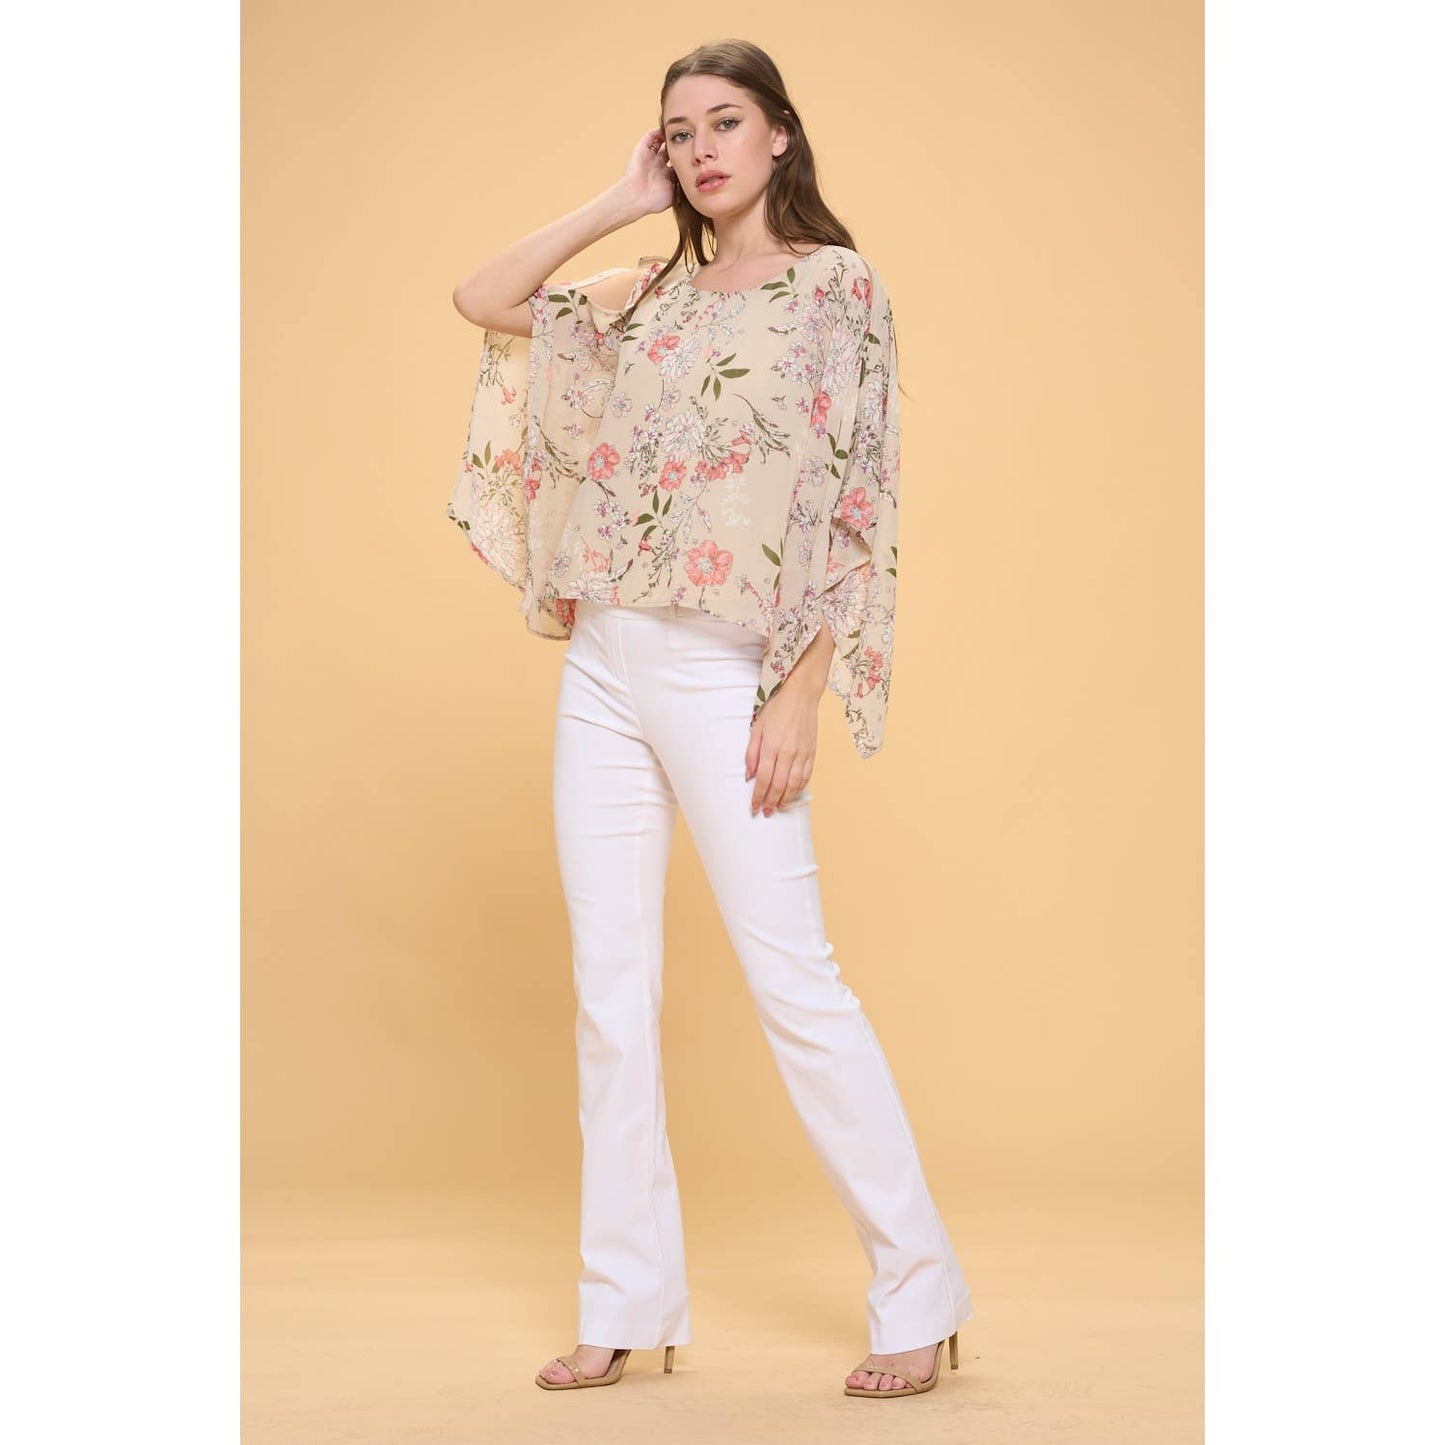 PS- Slit Angel Scoop Neck Overlay Blouse in Taupe/Mauve